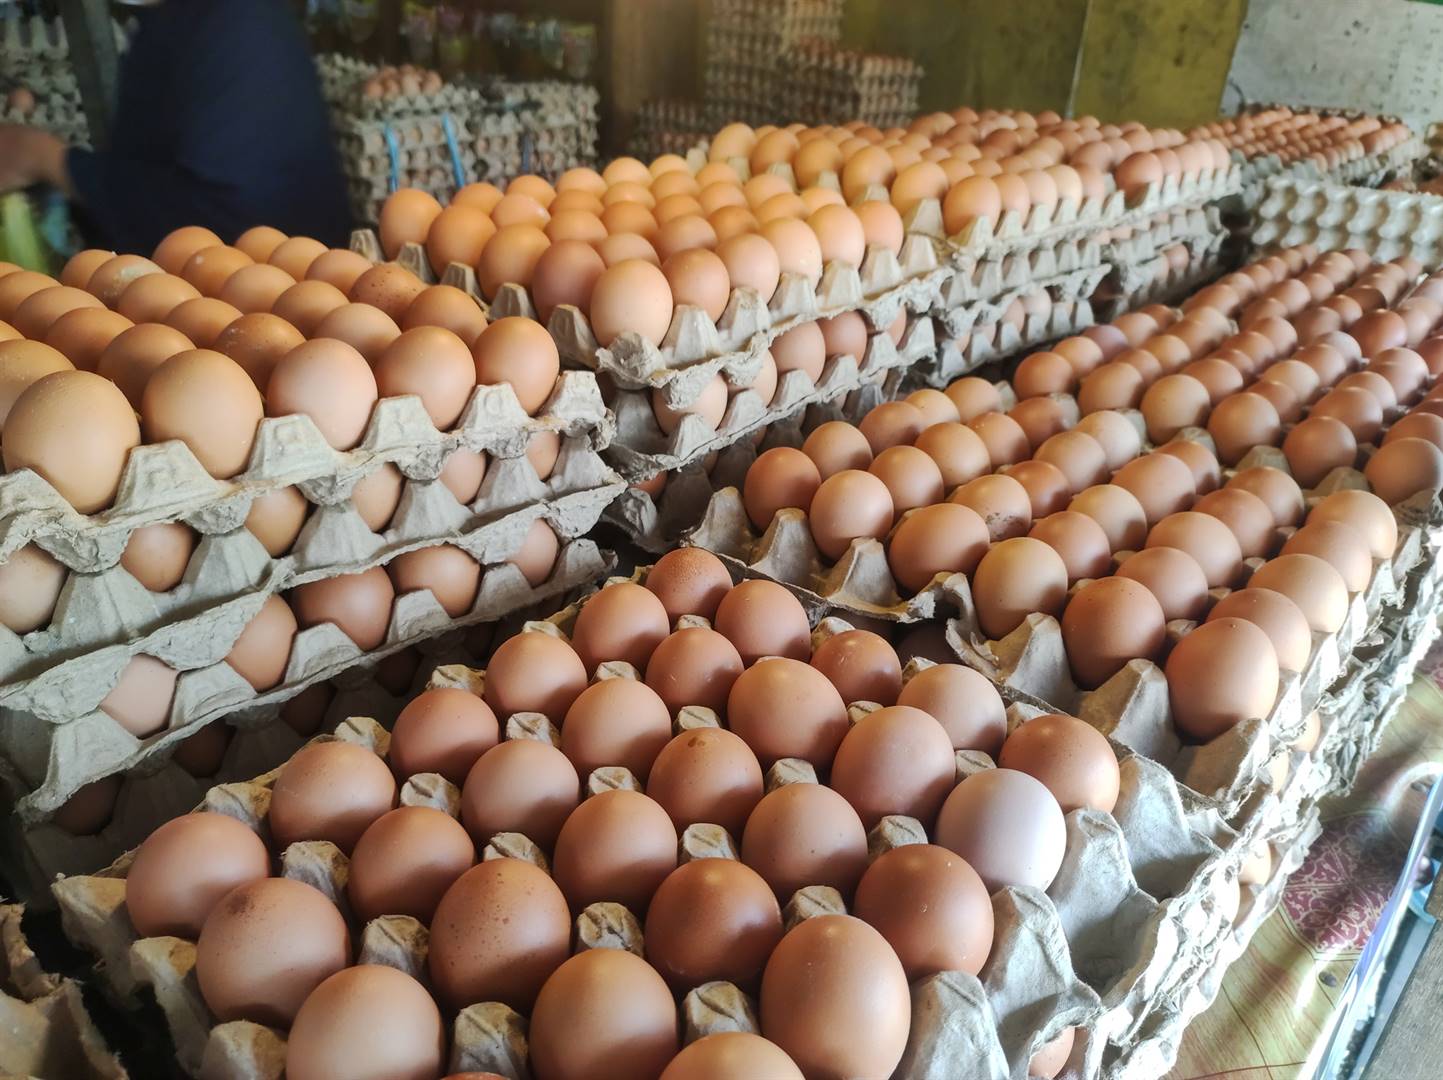 An outbreak of bird flu has led to the culling of thousands of egg-laying hens which could soon lead to the price of the breakfast and baking staple soaring.